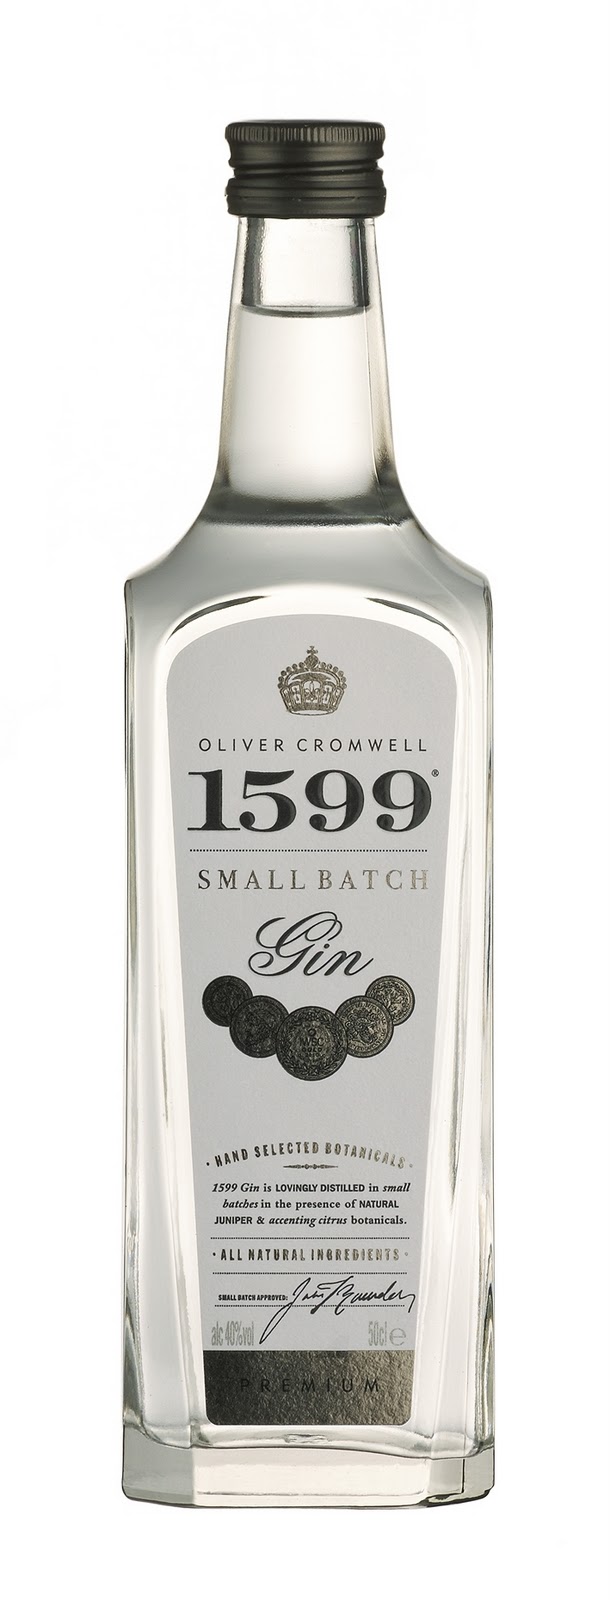 Given To Distracting Others: Aldi's Oliver Cromwell 1599 Premium Gin